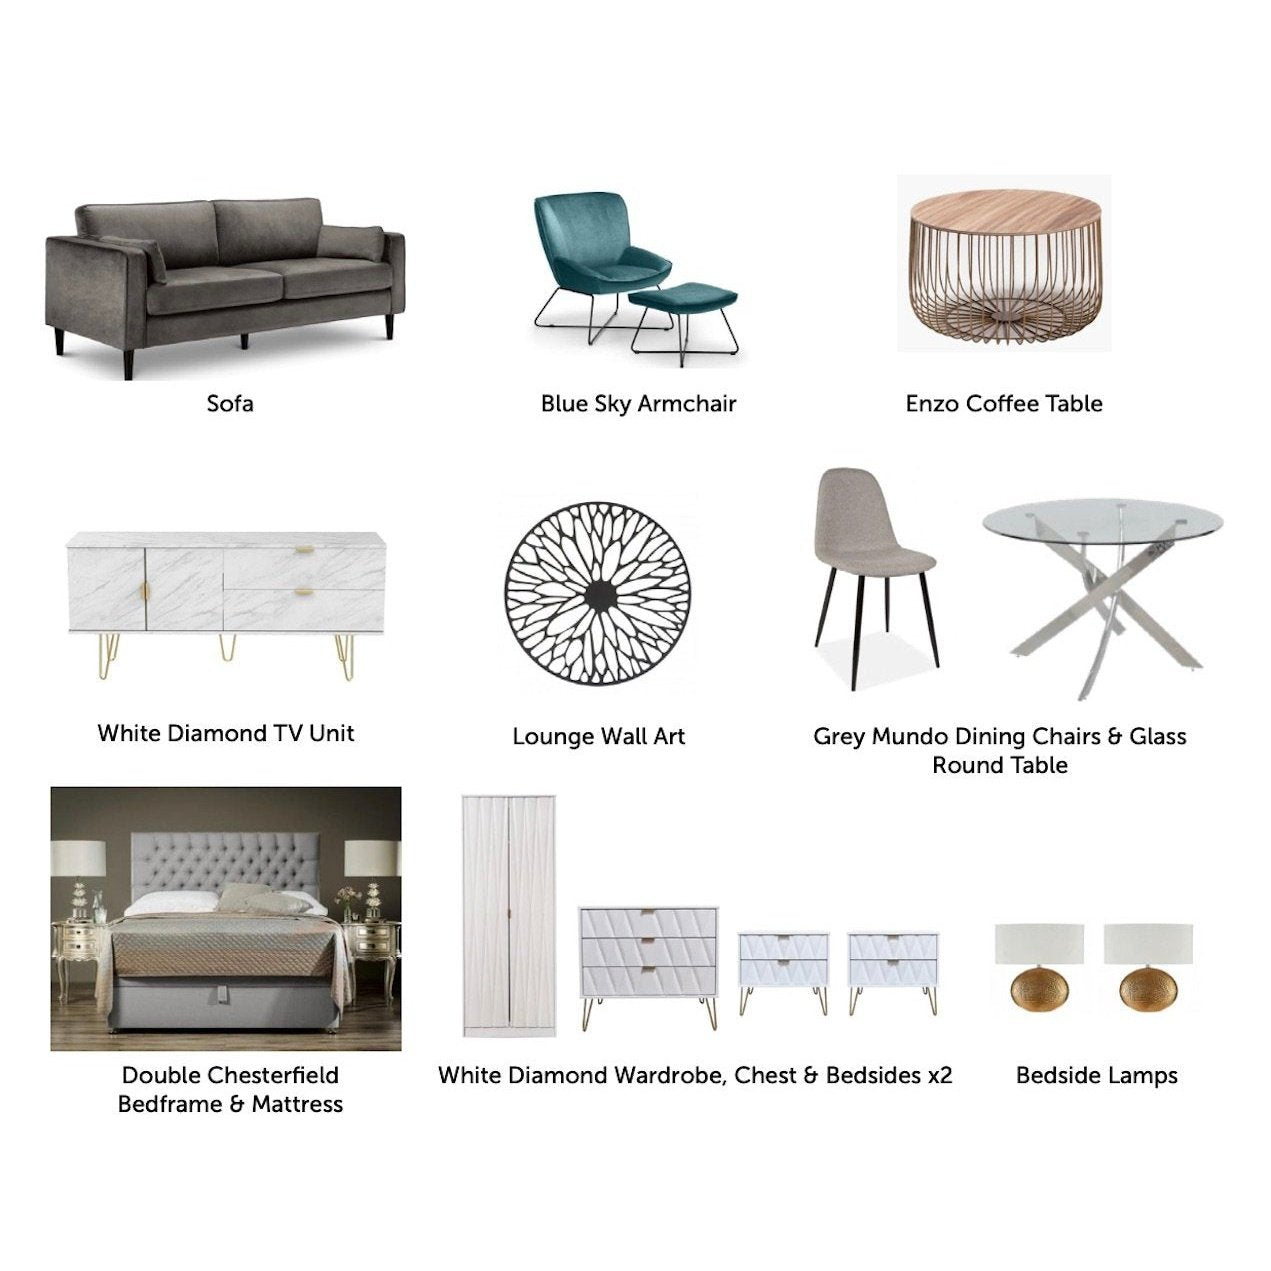 White Diamond furniture package products | Manor Interiors